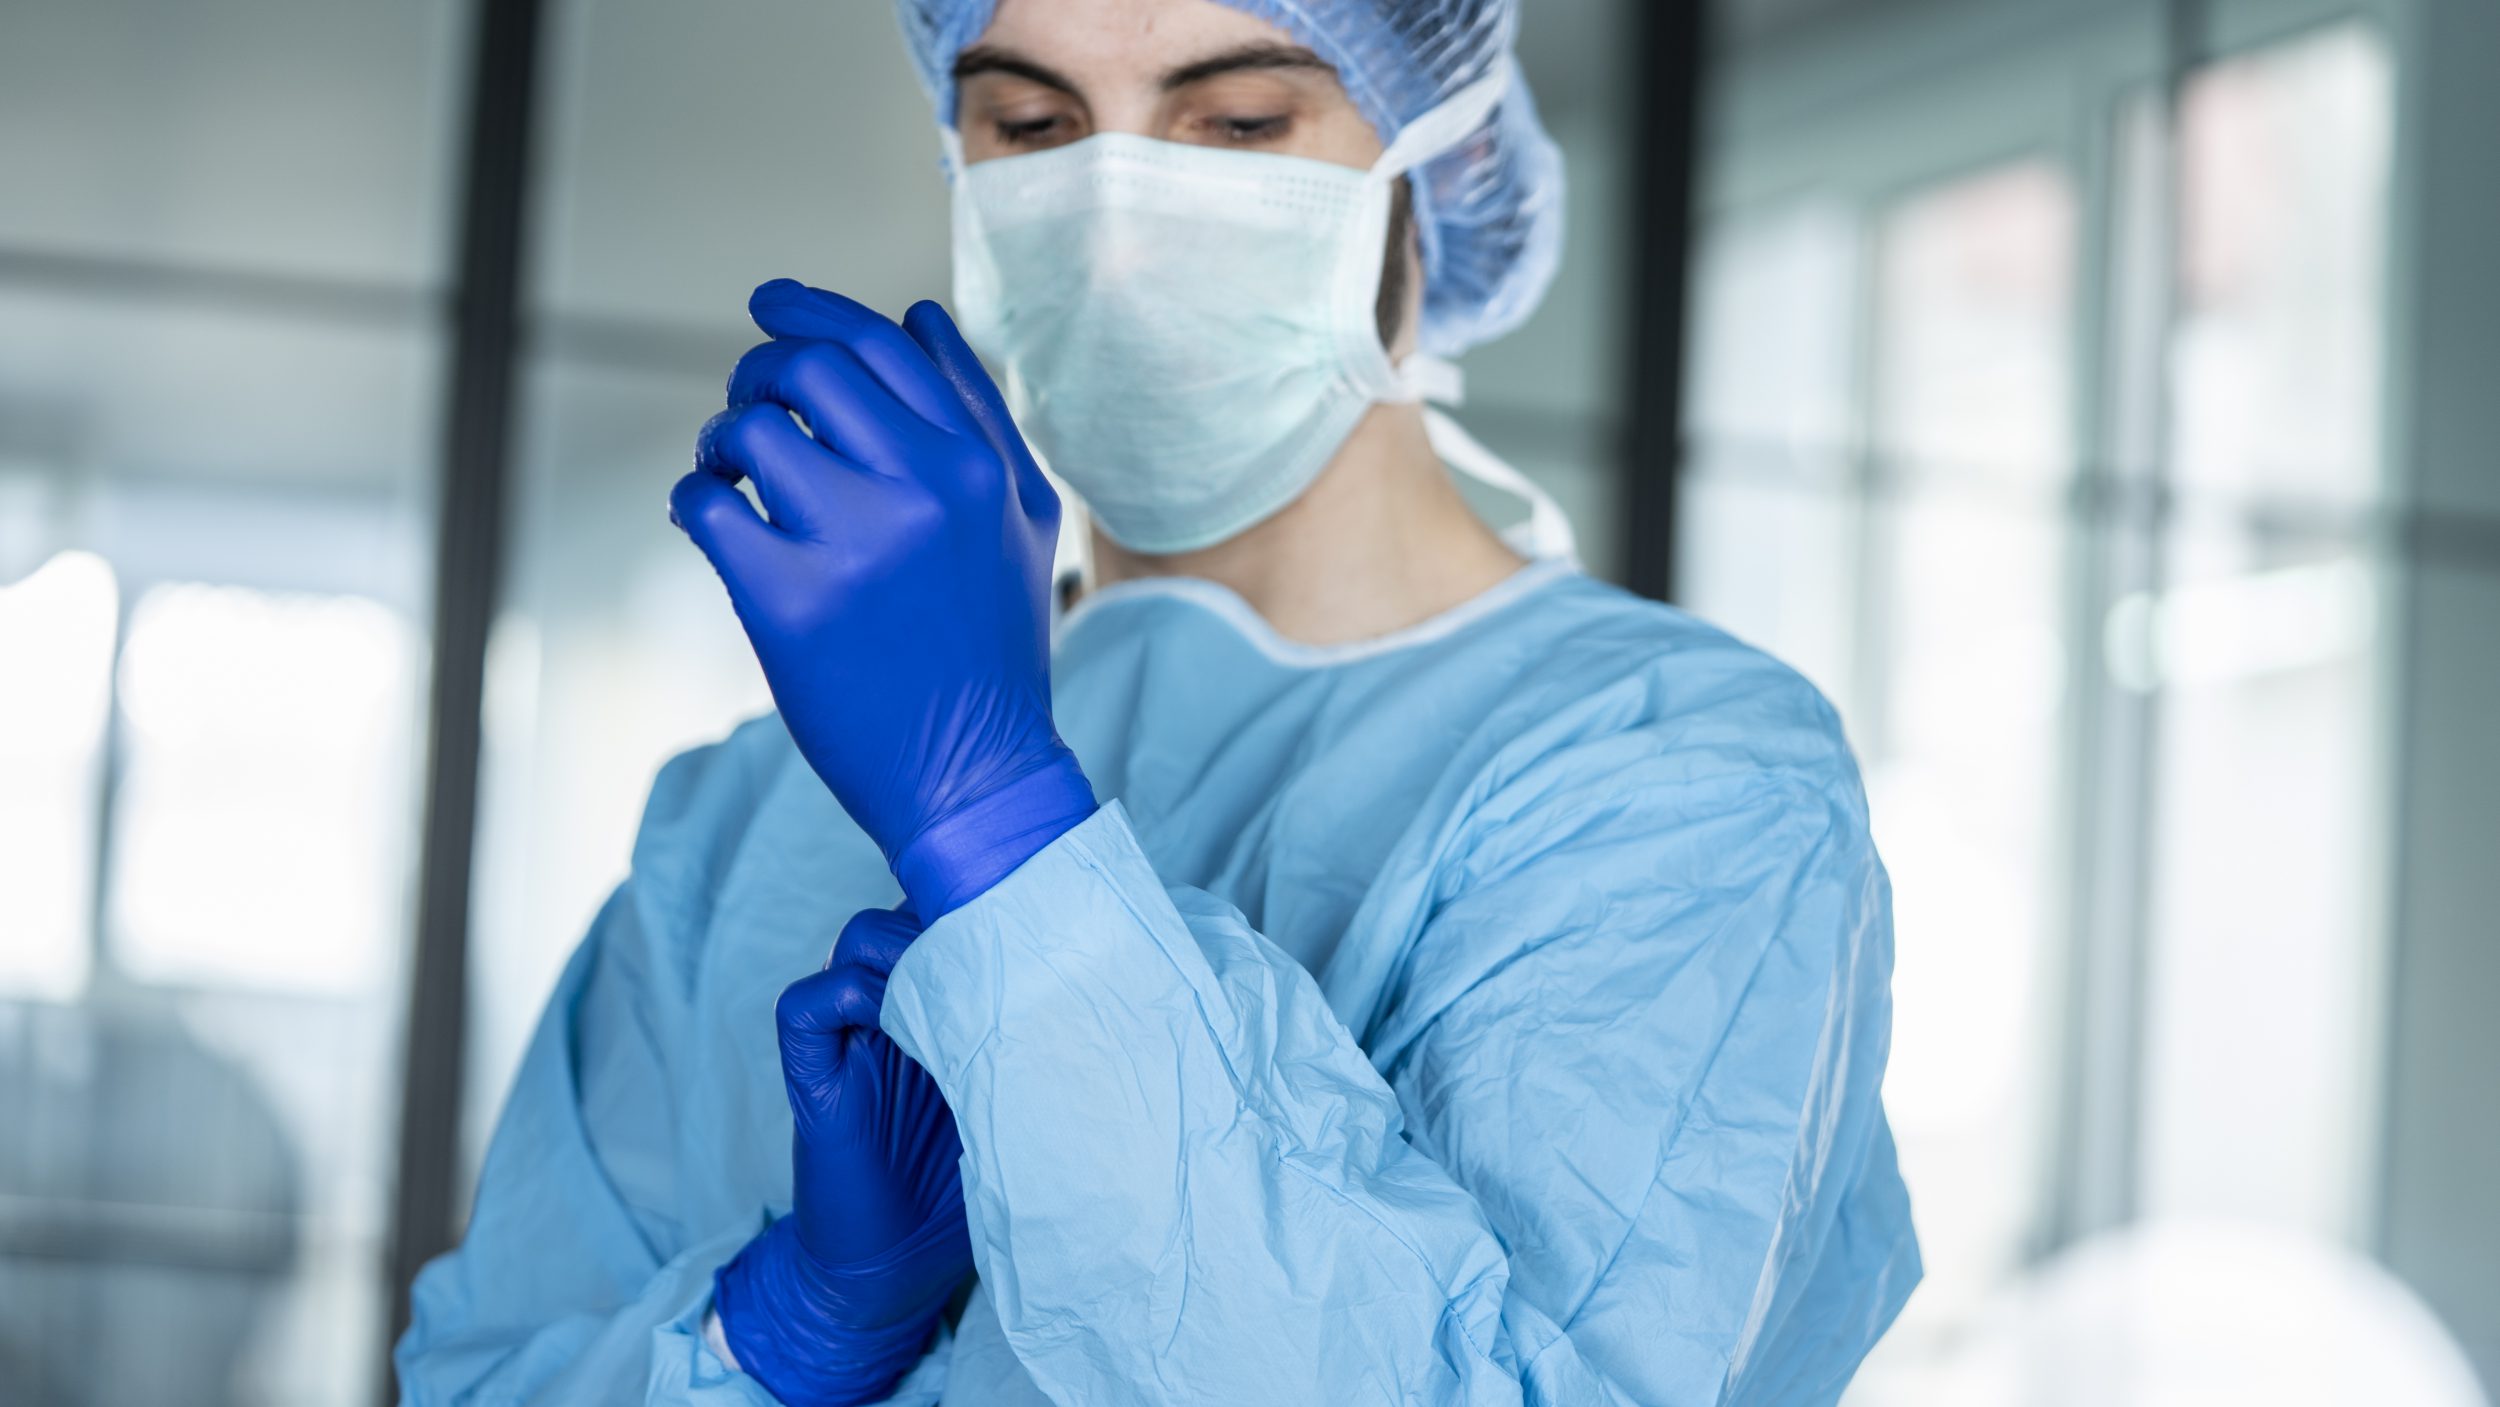 Doctor putting on protective blue gloves from isolation carts